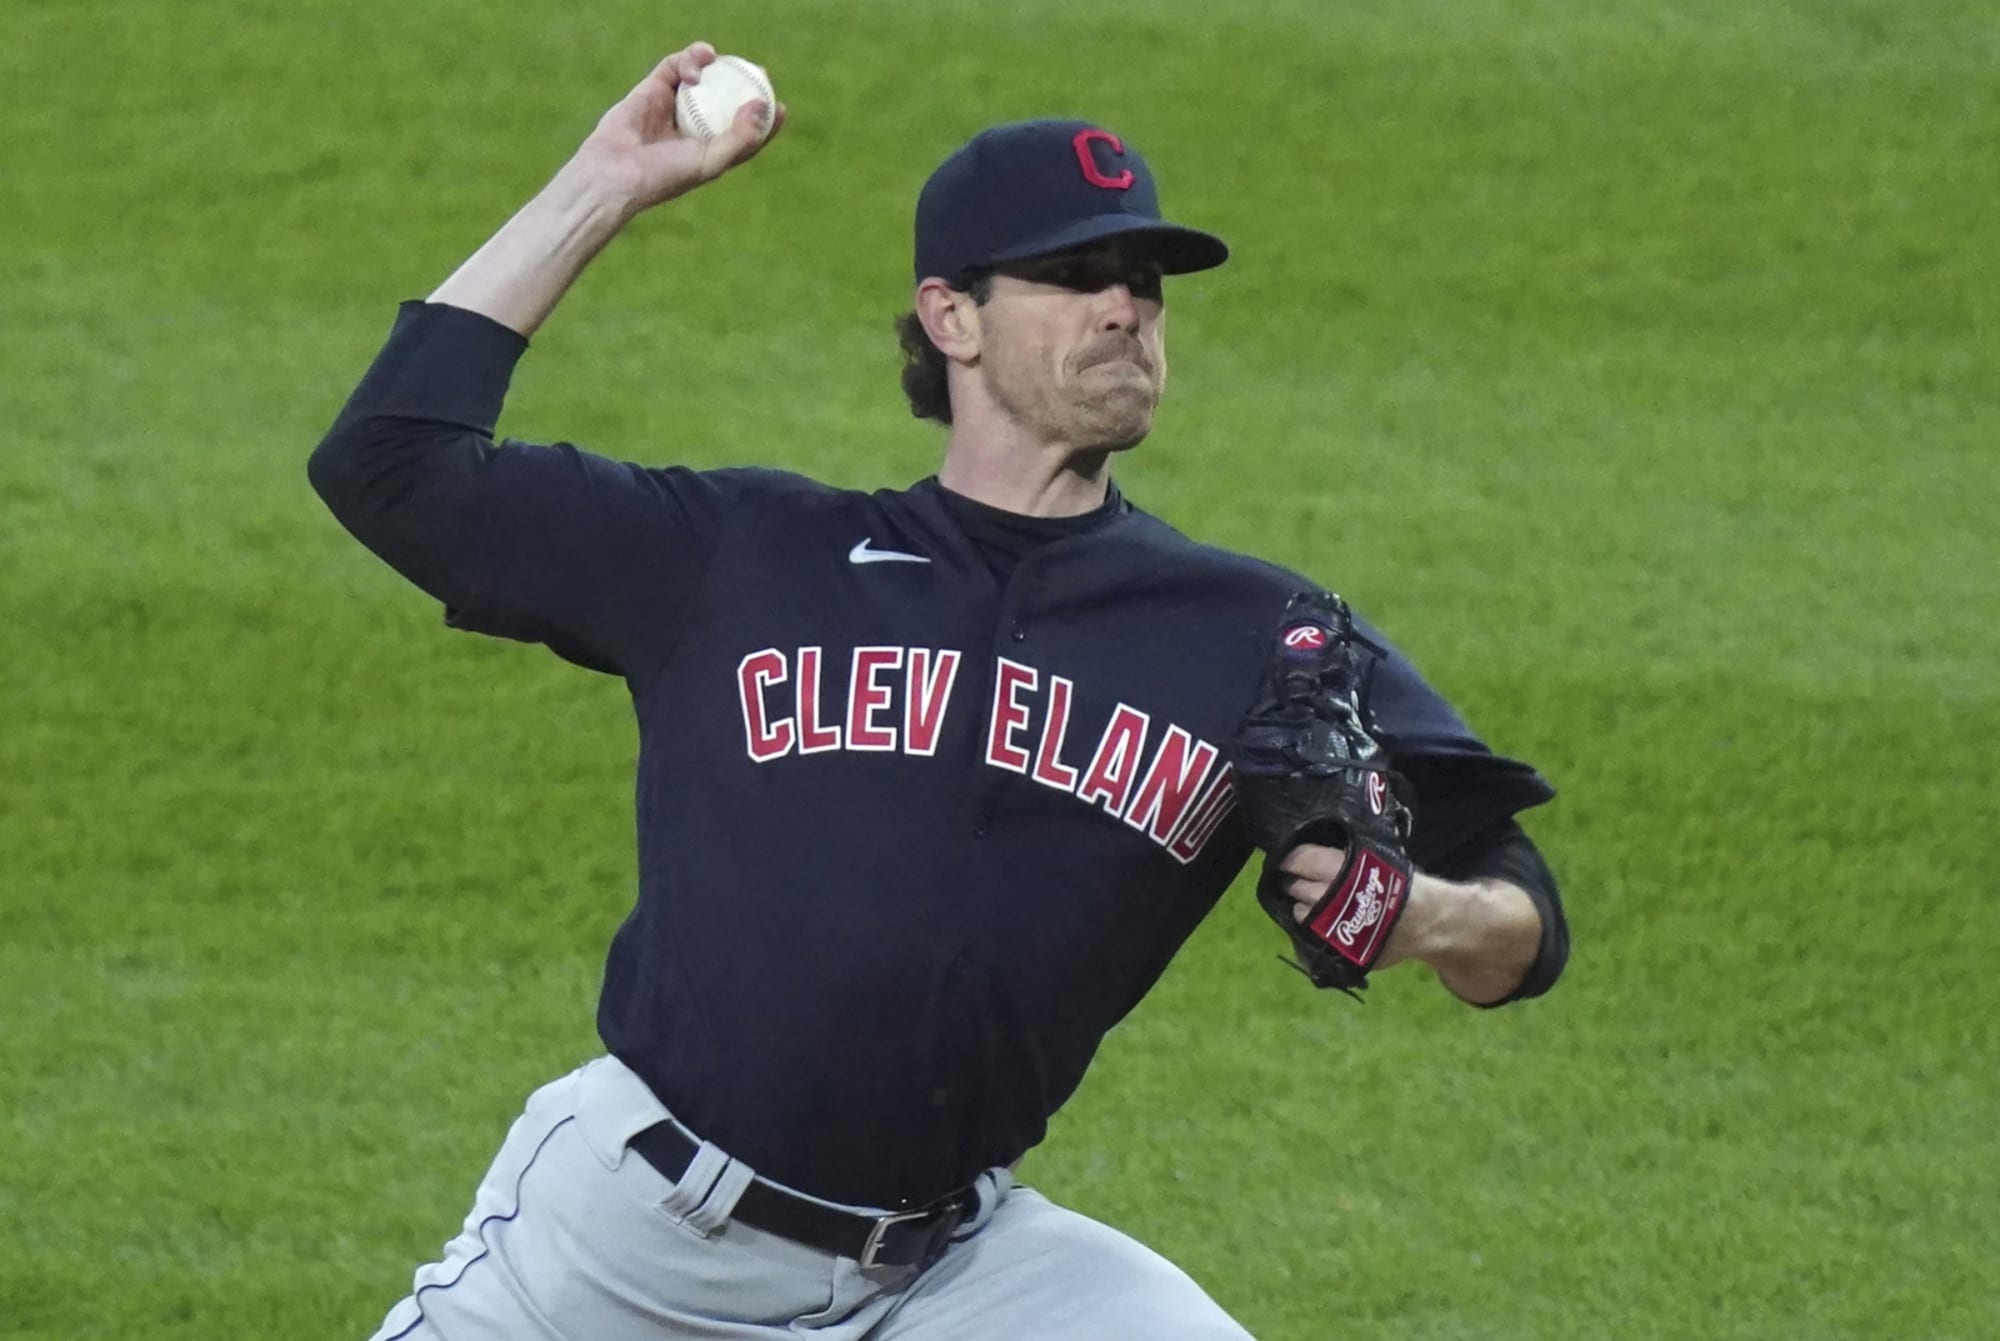 Indians: Shane Bieber is striking out batters at an absolutely